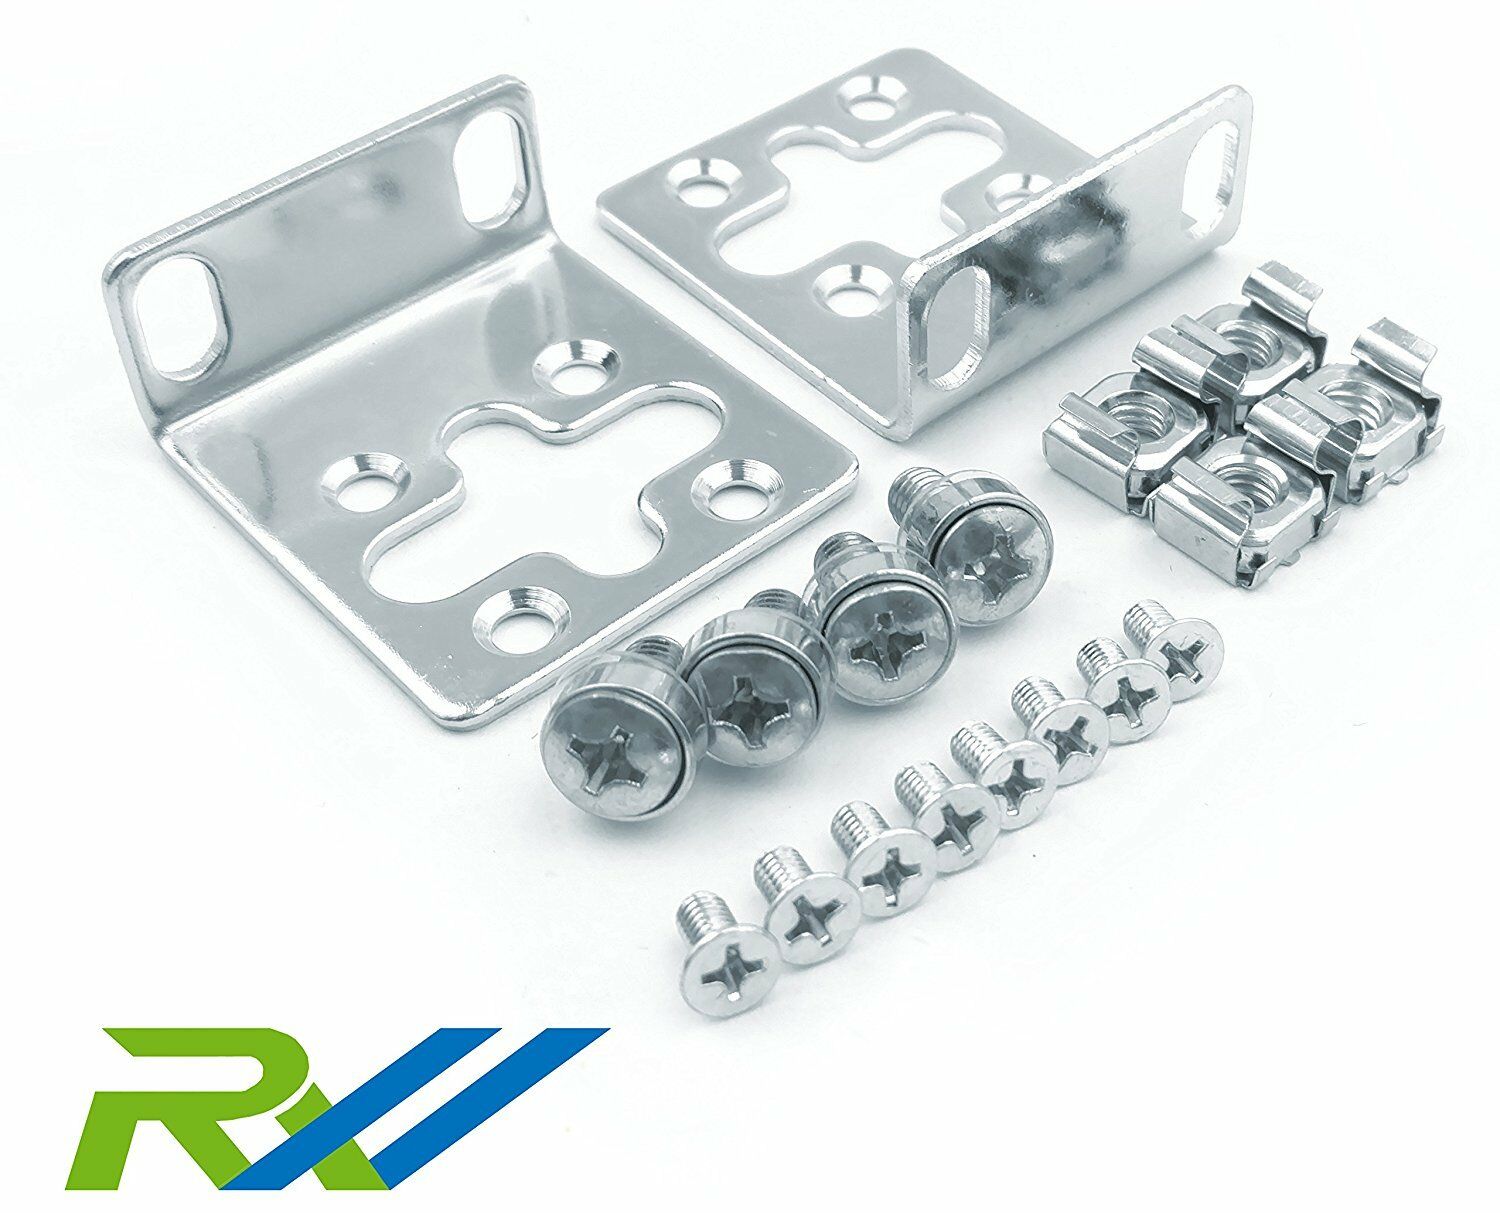 Rack Mount Kit Fits 17.3" Wide Rack Compatible/replacement 5064-2085 / 5069-6535